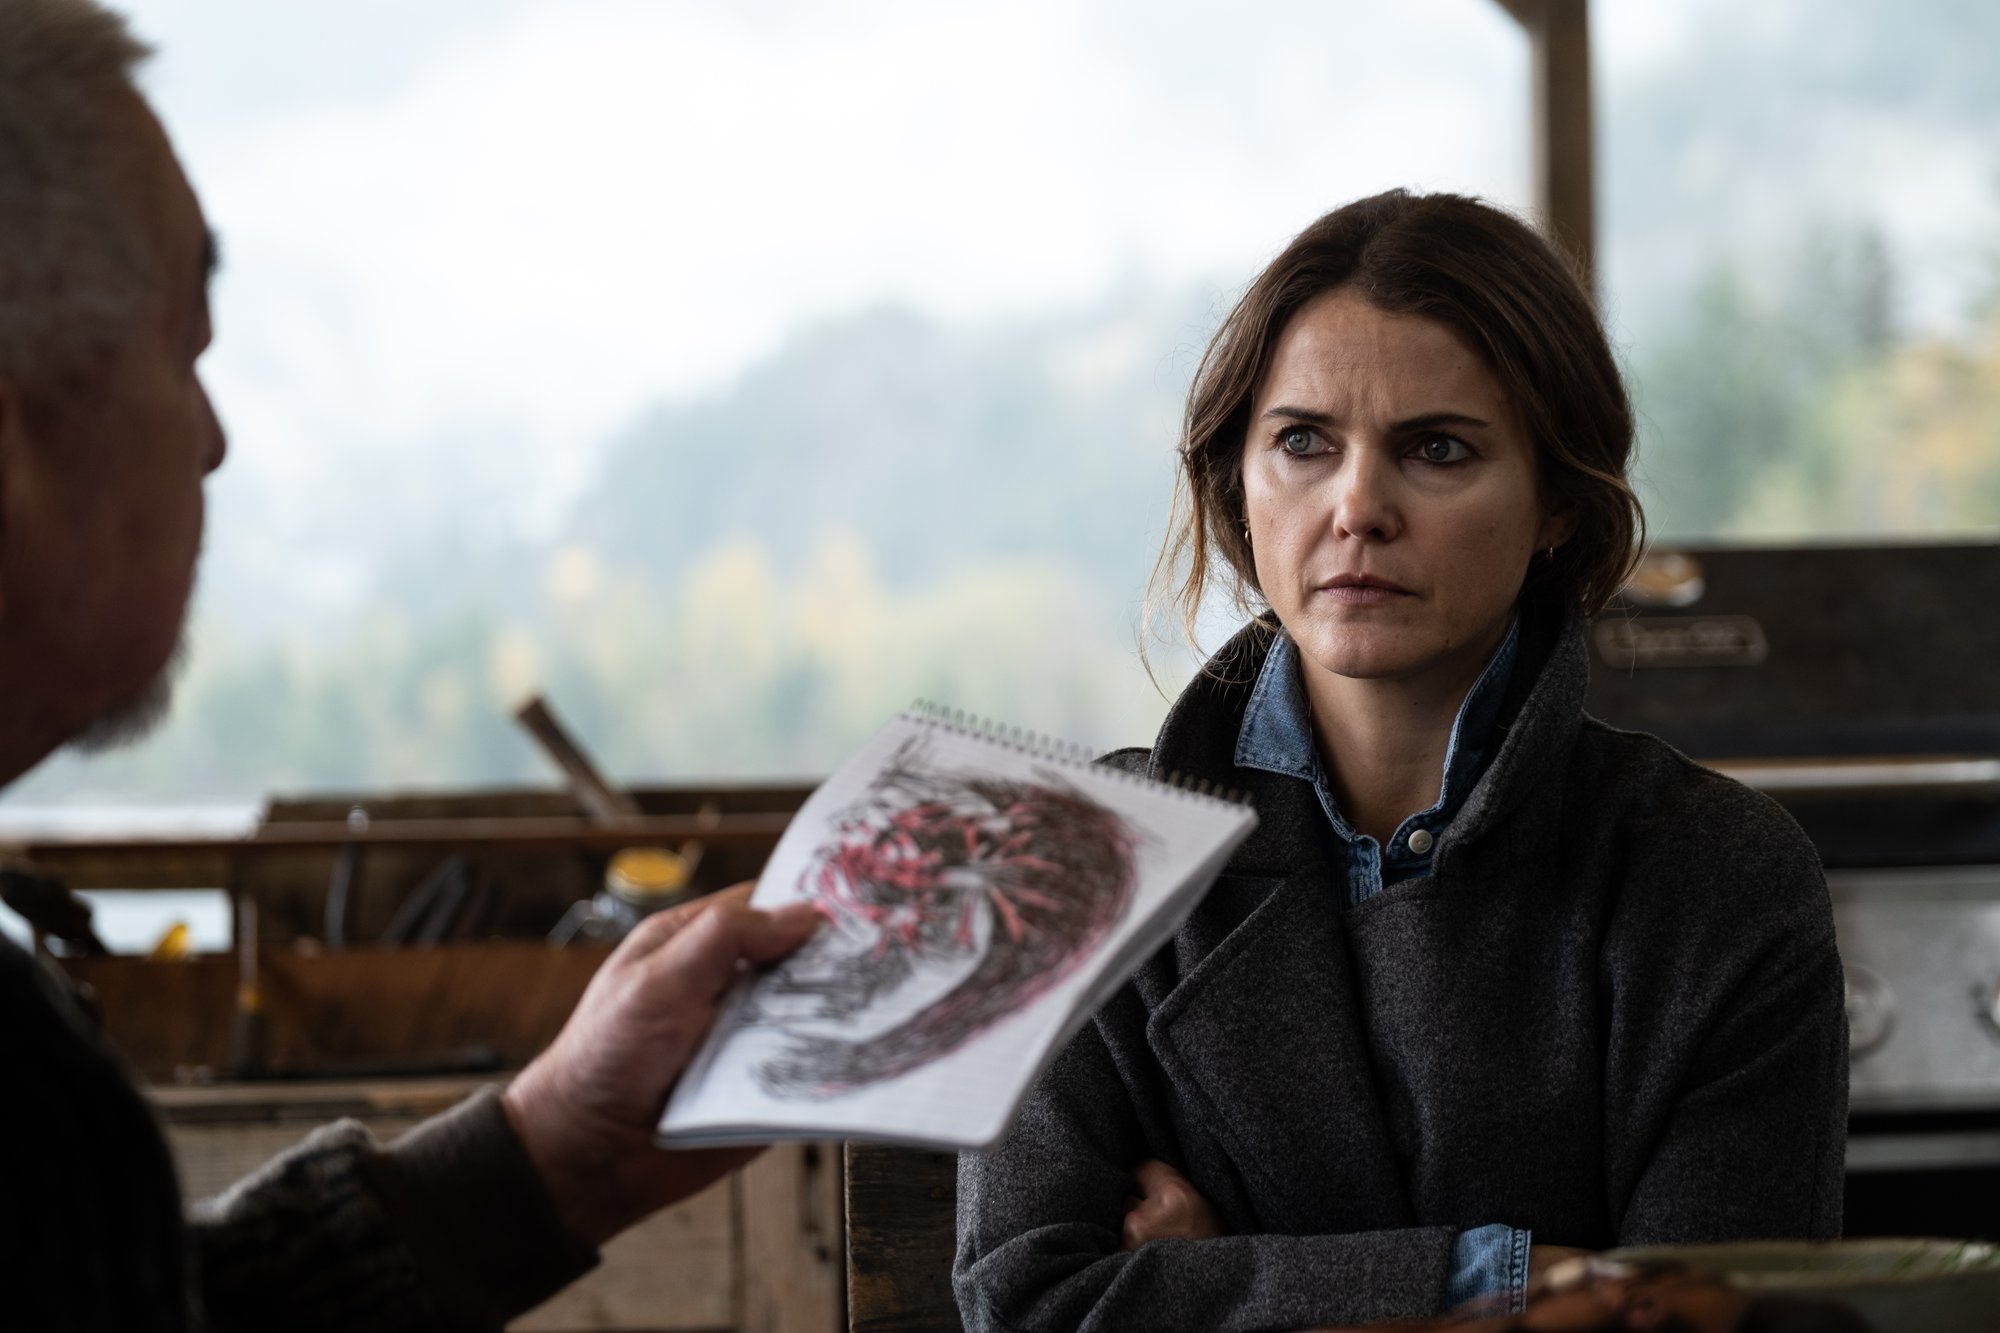 'Antlers' actor Keri Russell with her arms crossed sitting across from drawing